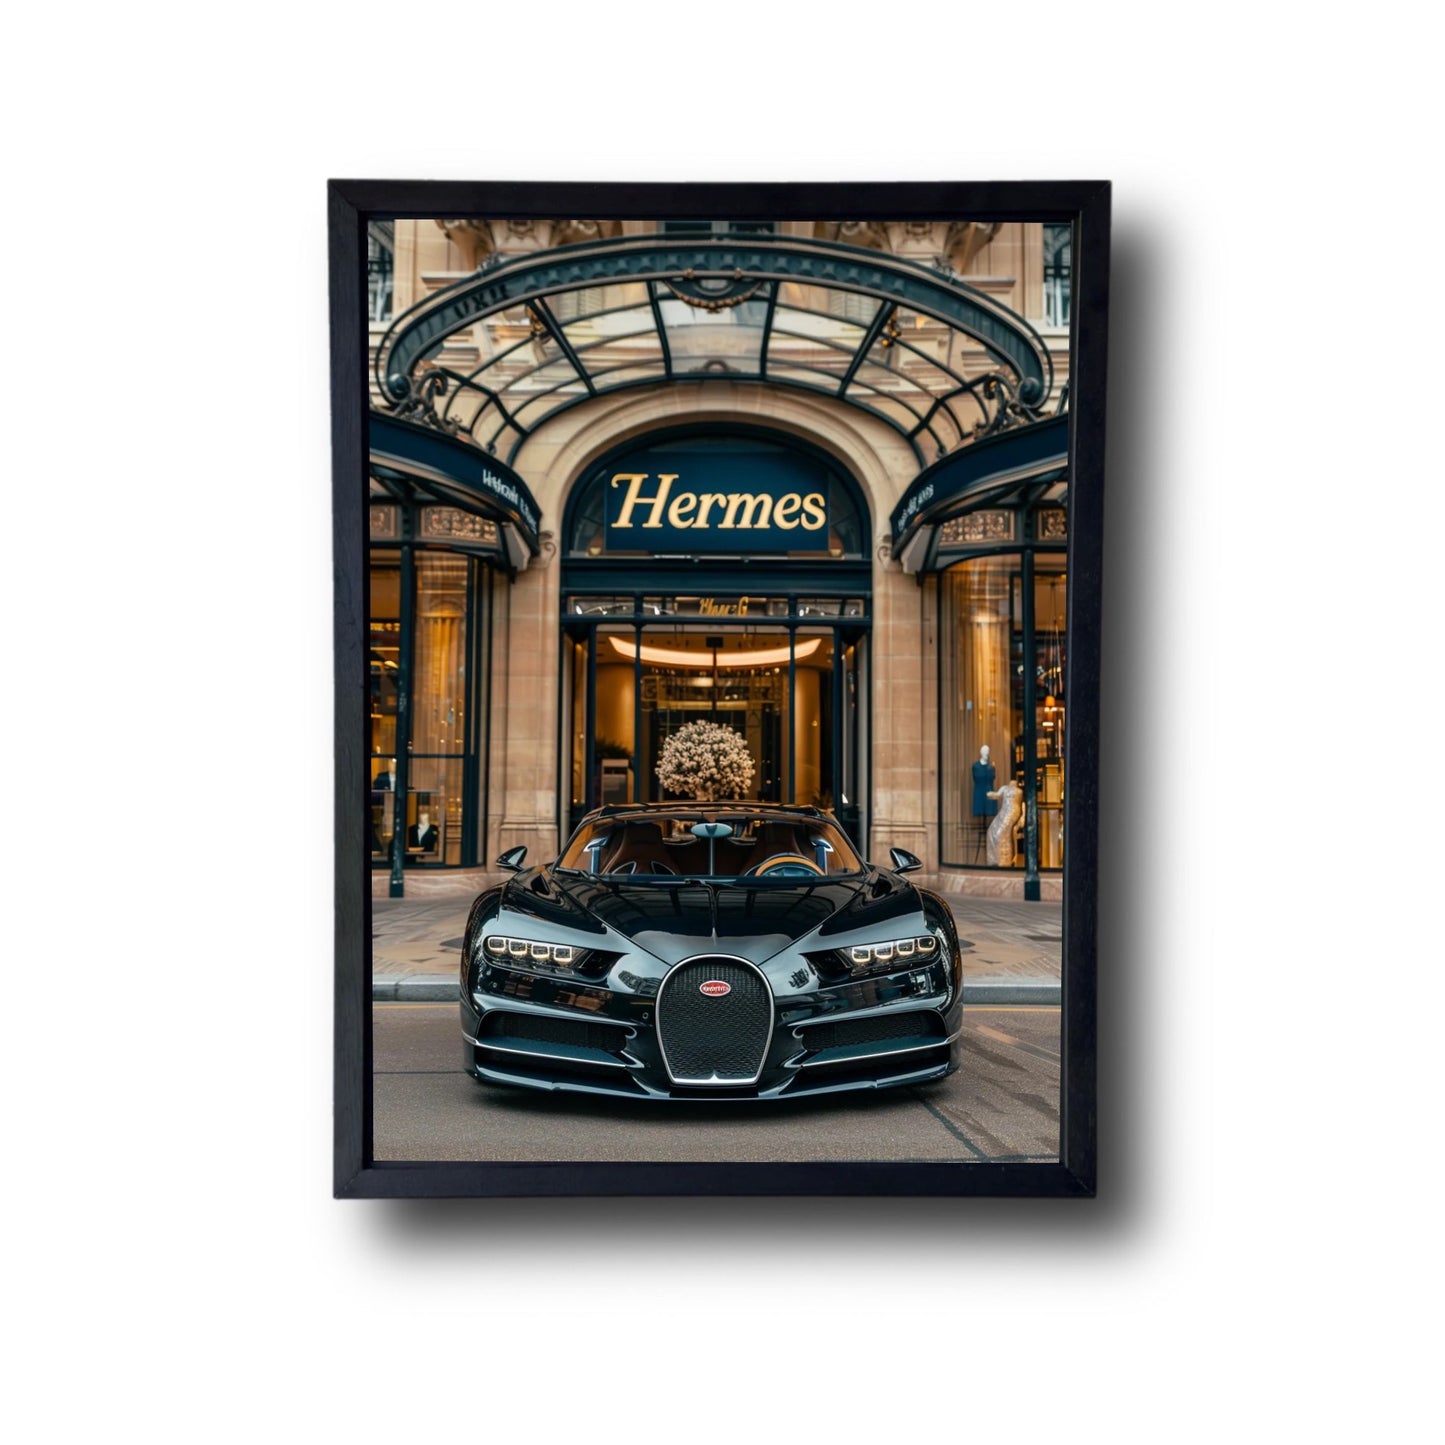 Bugatti Chiron Front of Hermes Store